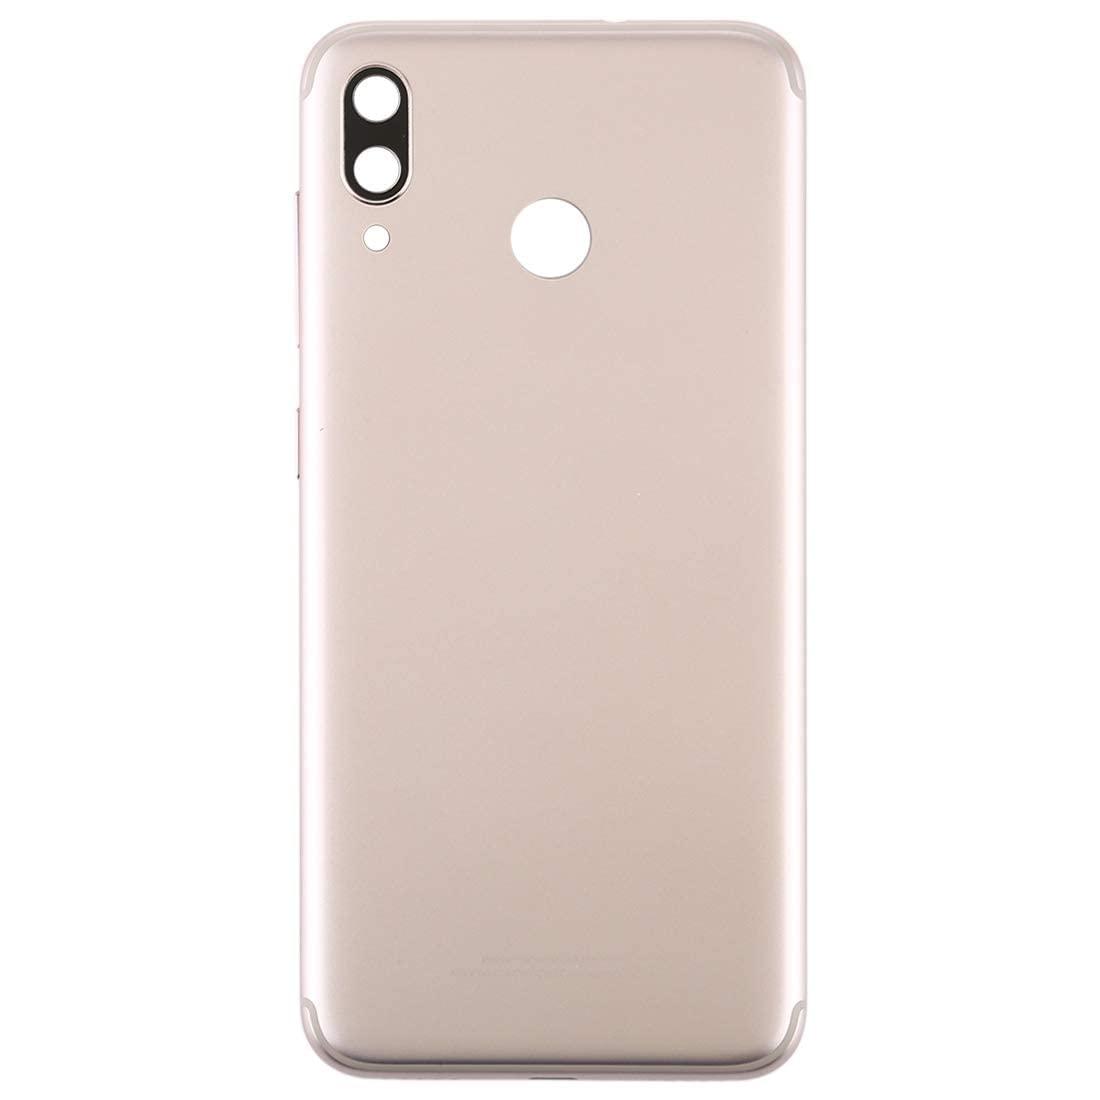 Back Panel for Asus Zenfone Max M1 Gold